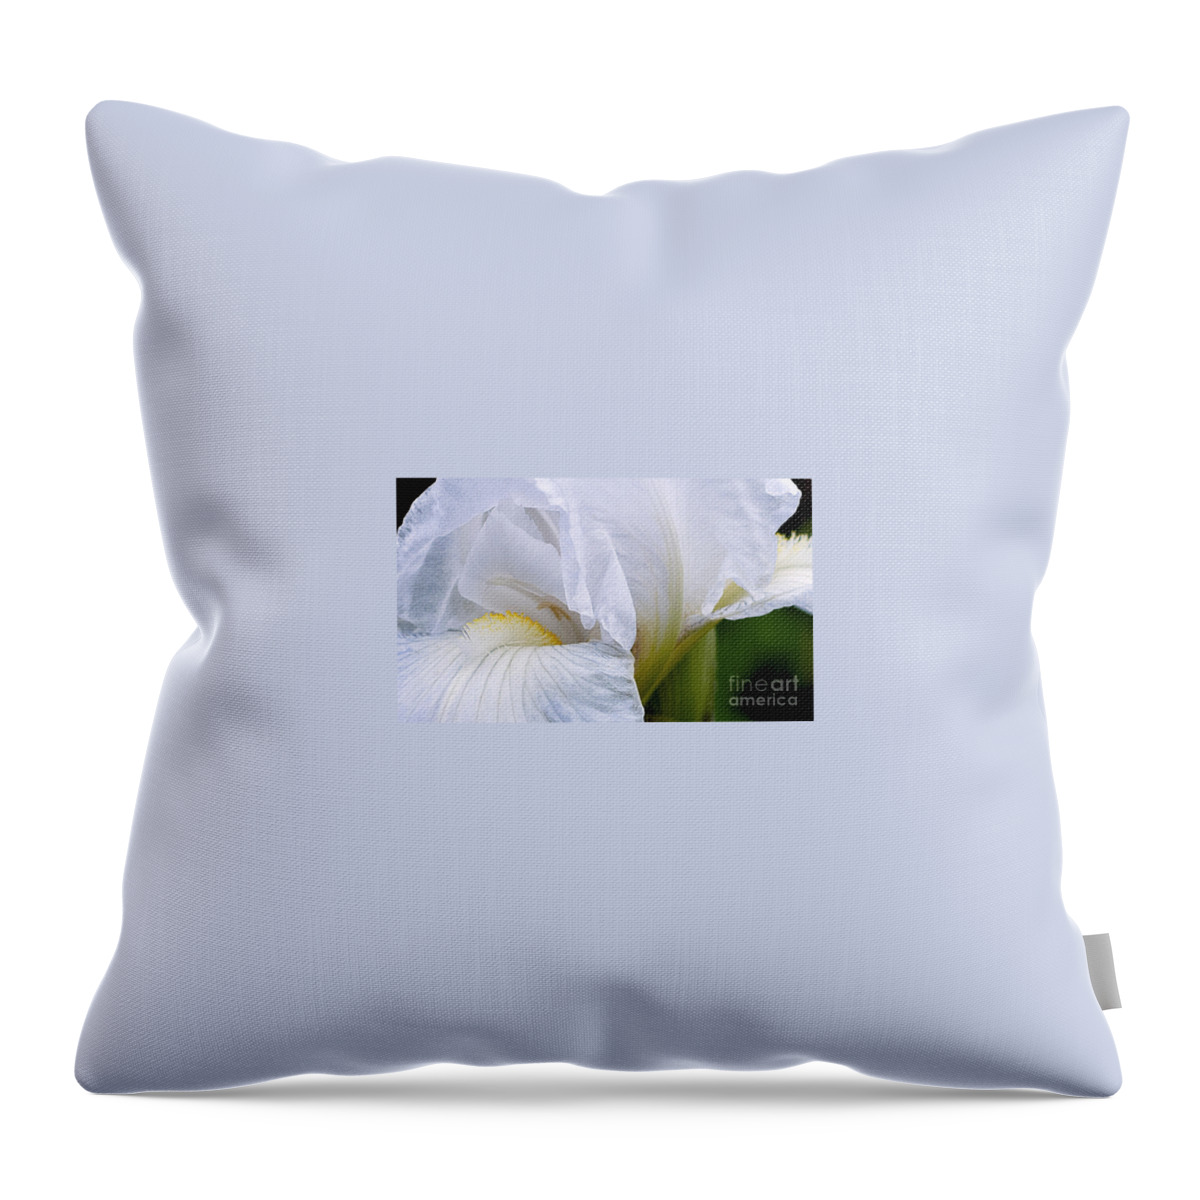 Ron Roberts Throw Pillow featuring the photograph Iris Abstract by Ron Roberts